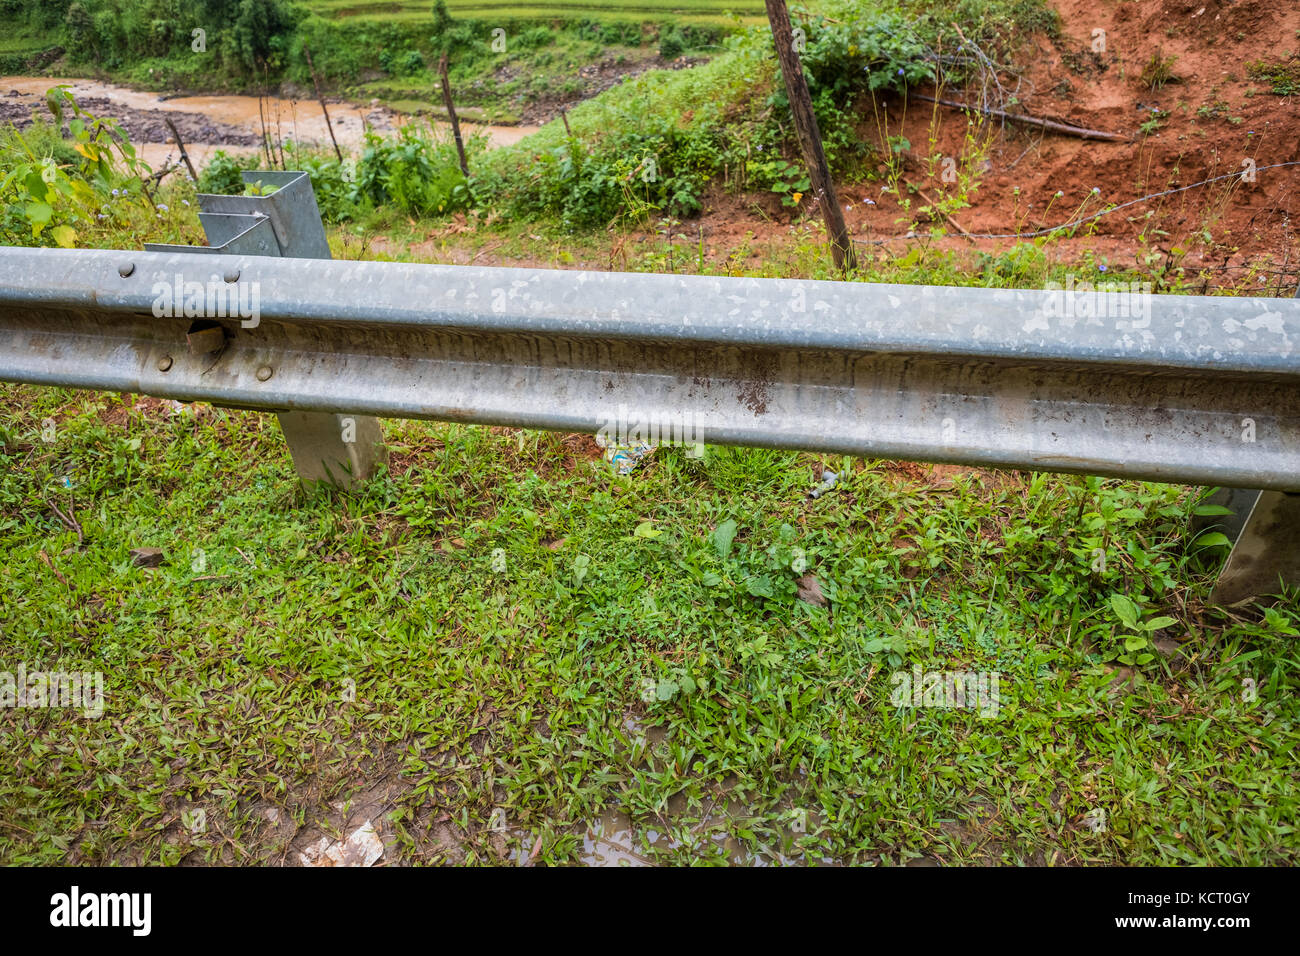 Guard rail in countryside, Barrier that prevent car accident Stock Photo